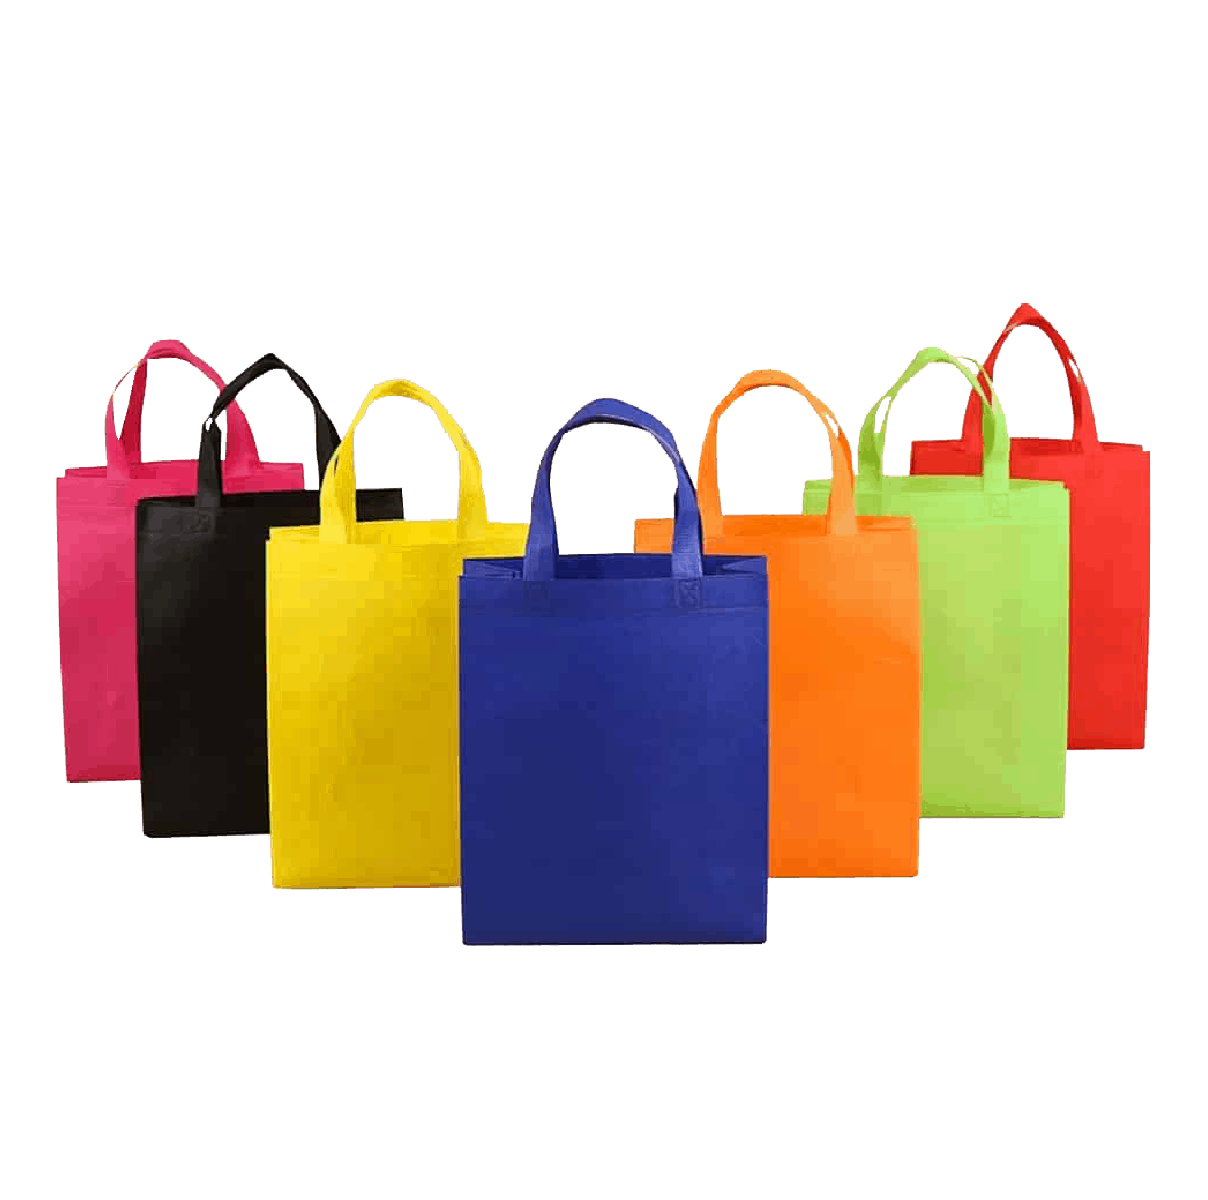 Non Woven Bag Malaysia Supplier at SJ-World Gifts Malaysia | Premium Gift and Corporate Gift Supplier in Malaysia